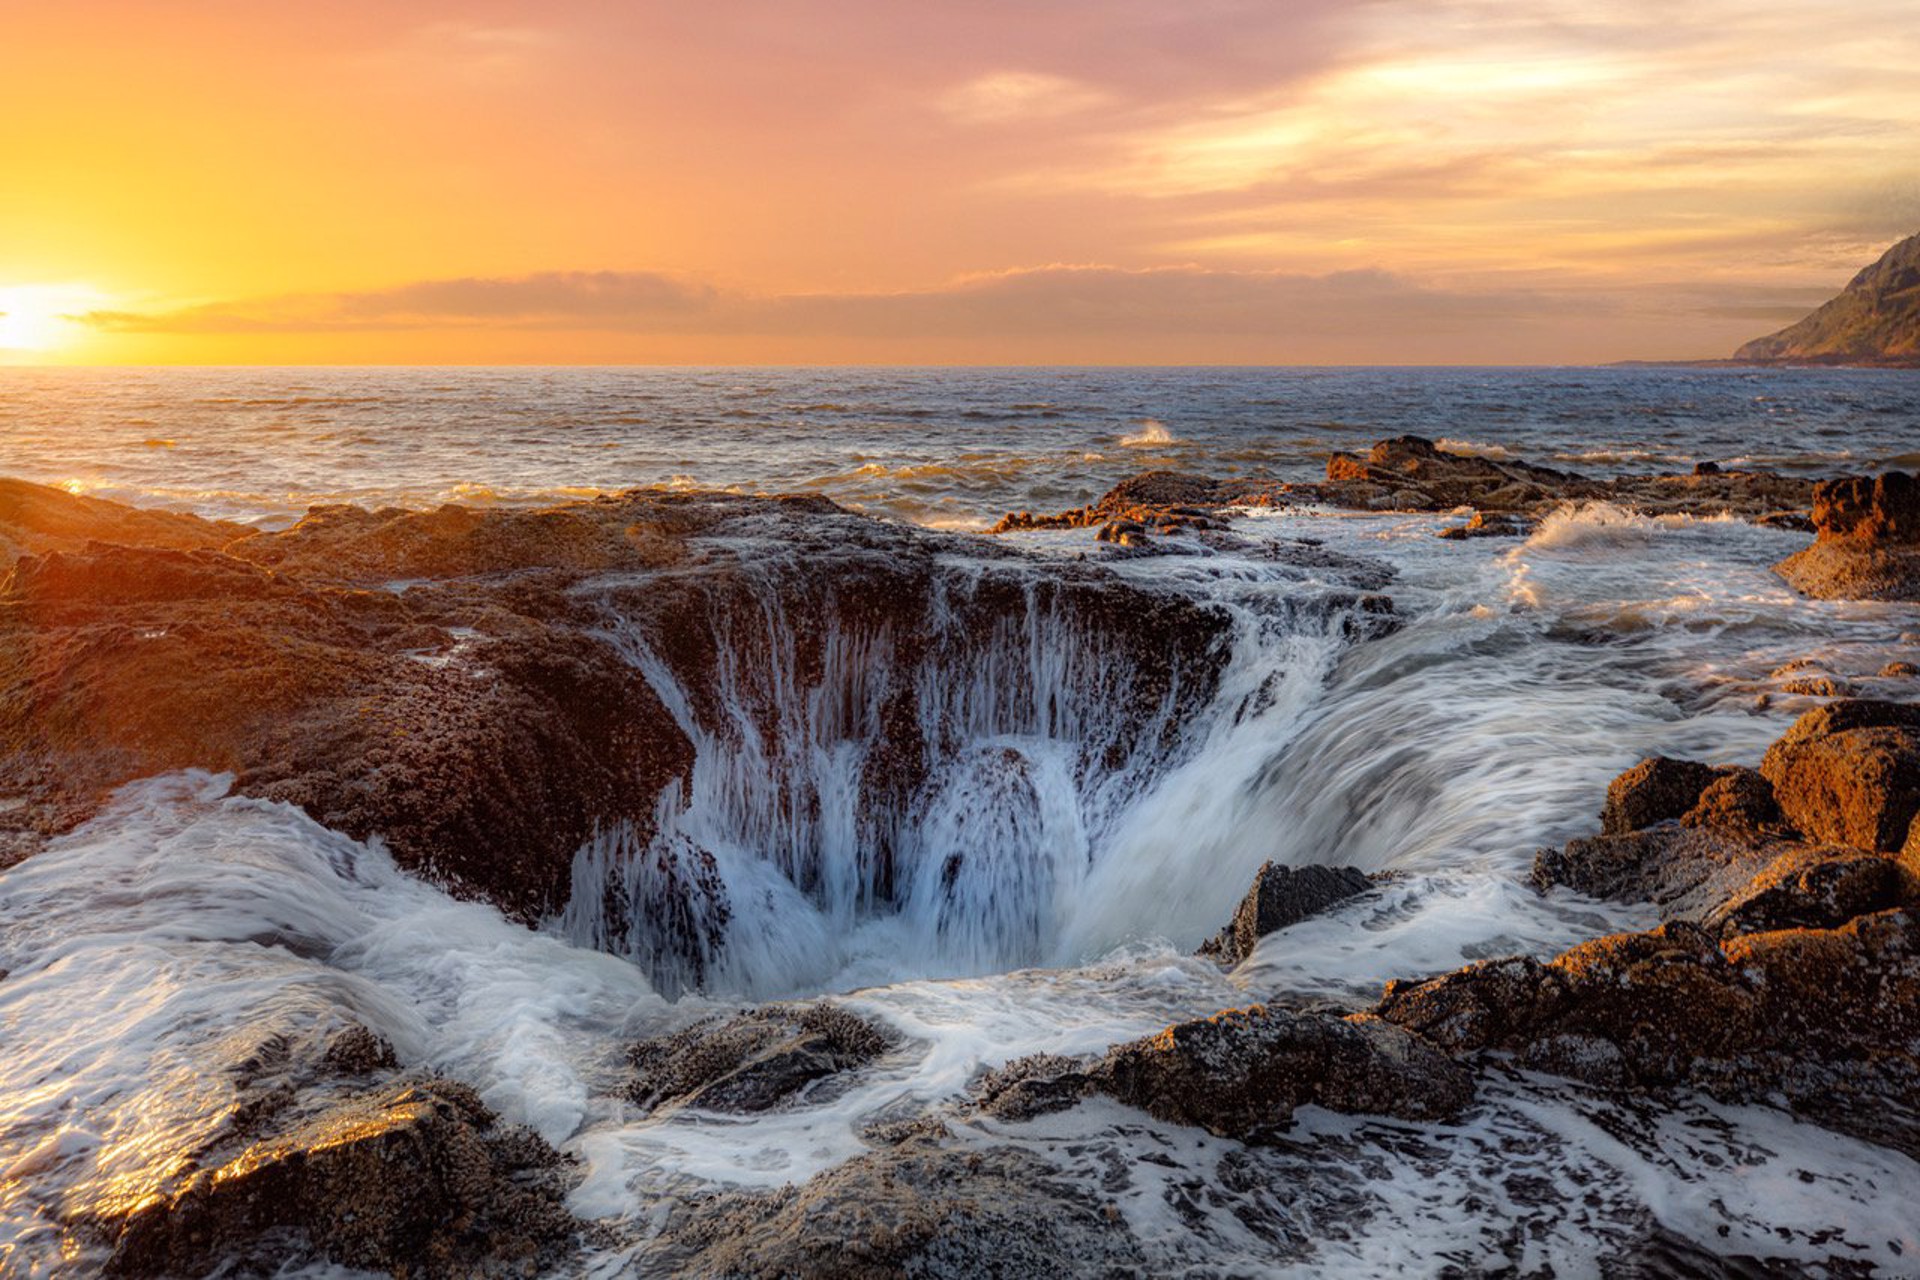 Sunset, Thor’s Well by Tim Truby